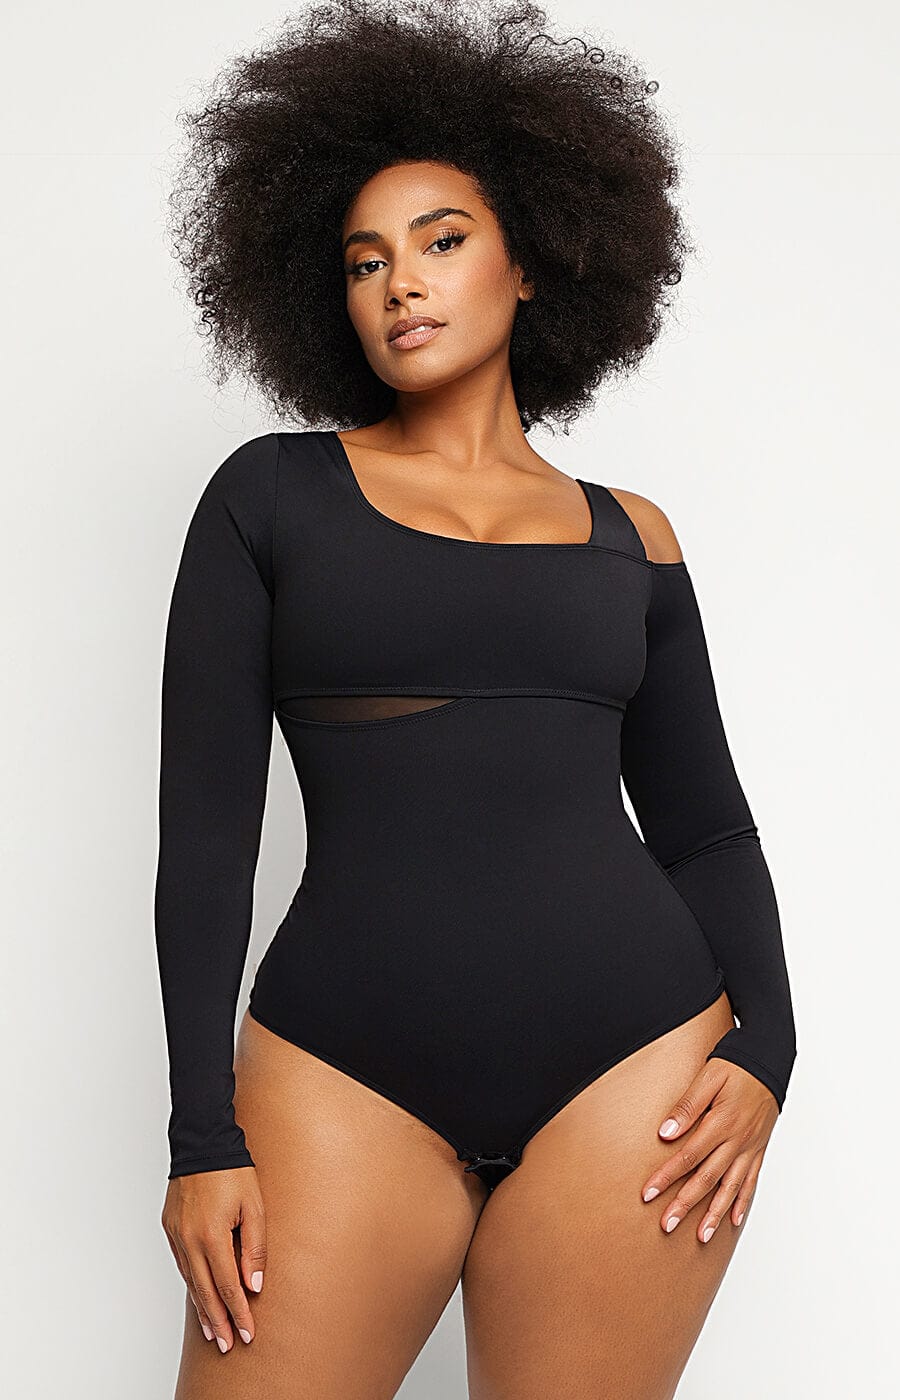 These Bodysuits May Help Flatten Your Tummy and Give You a Butt Lift